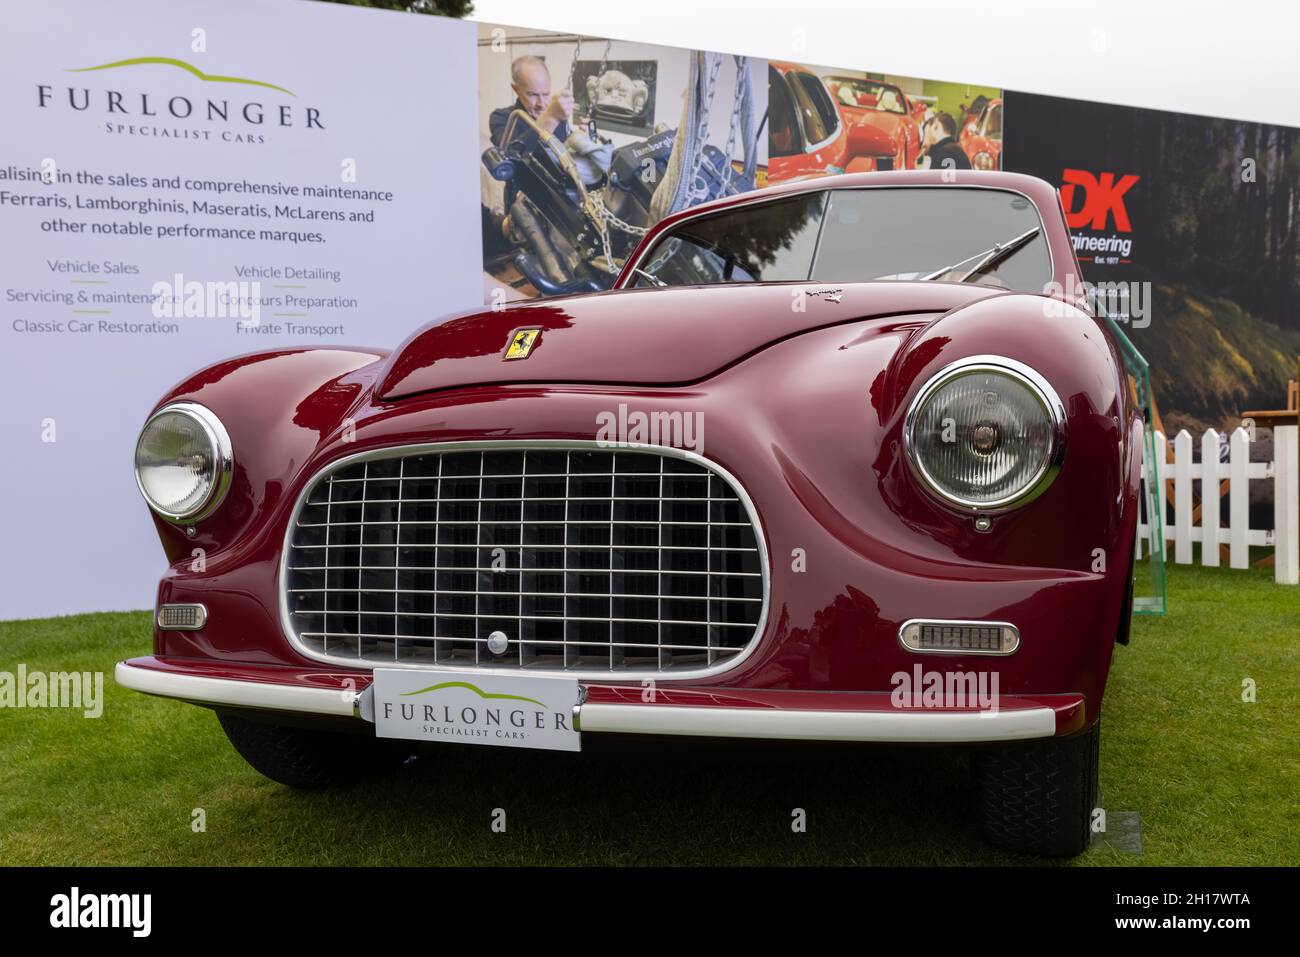 Ferrari 166 Inter Berlinetta Touring on display at the Concours d'Elegance held at Blenheim Palace on the 5th September 2021 Stock Photo